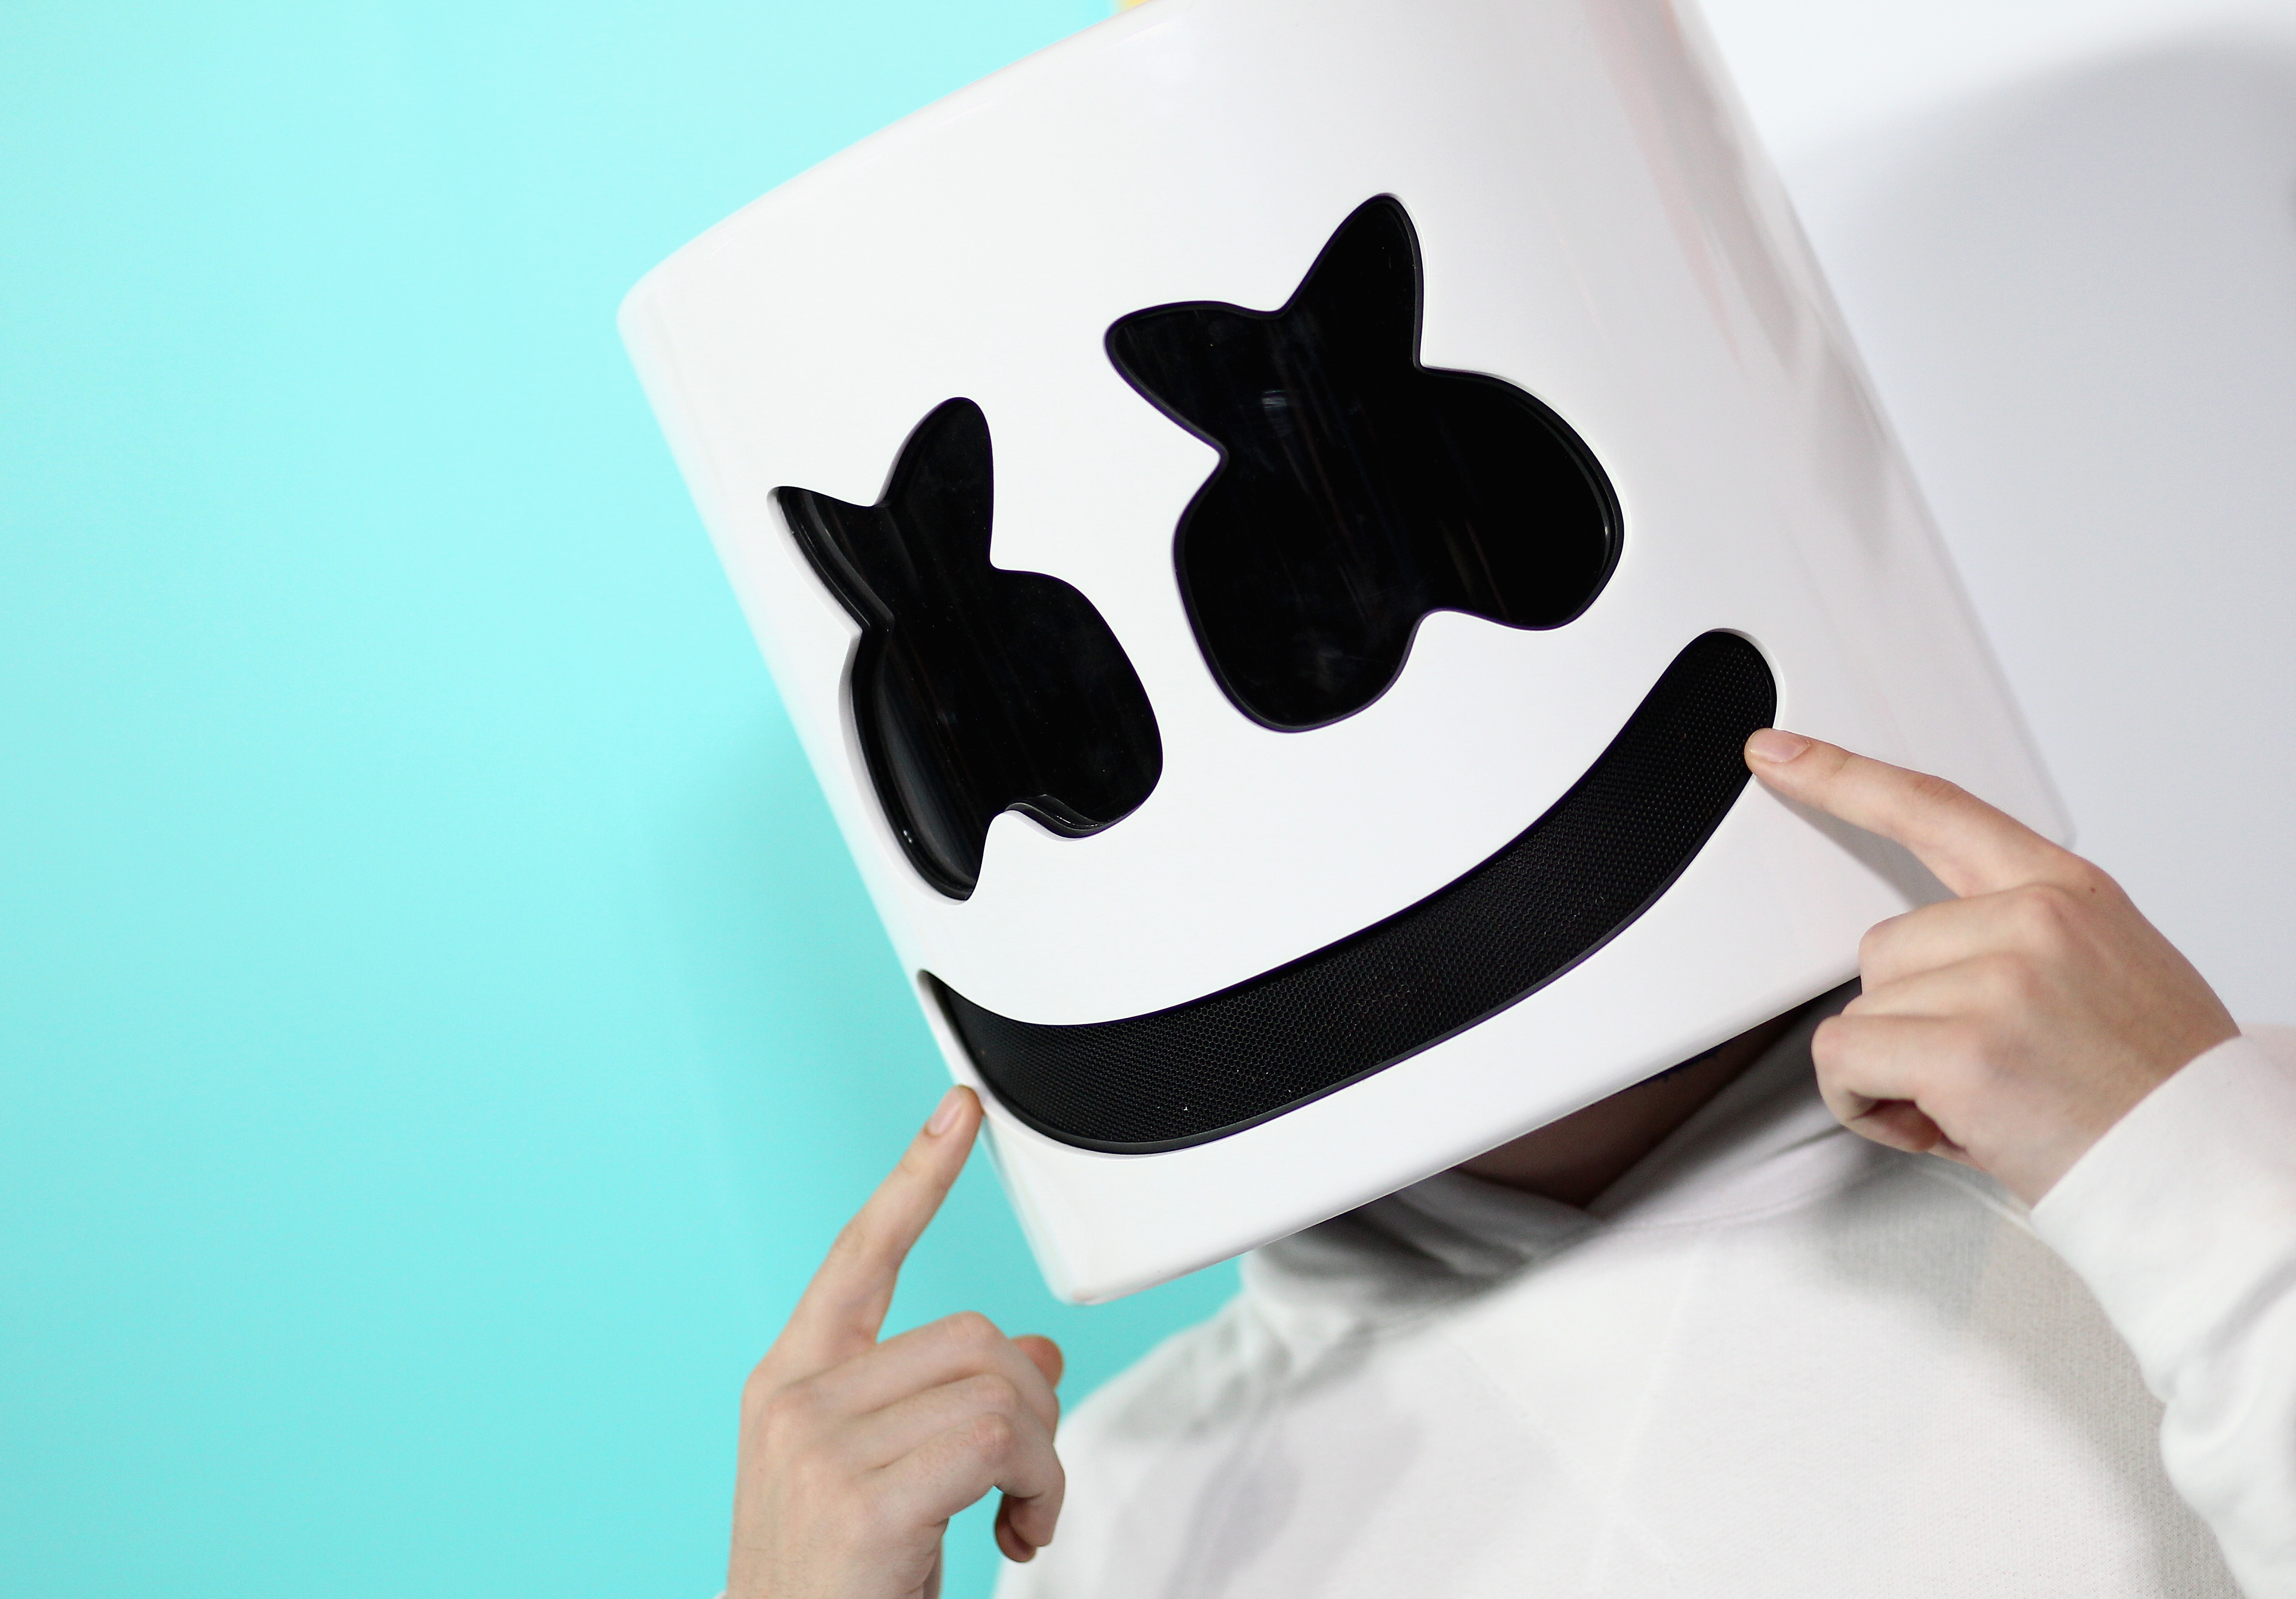 50+ Marshmello HD Wallpapers and Backgrounds